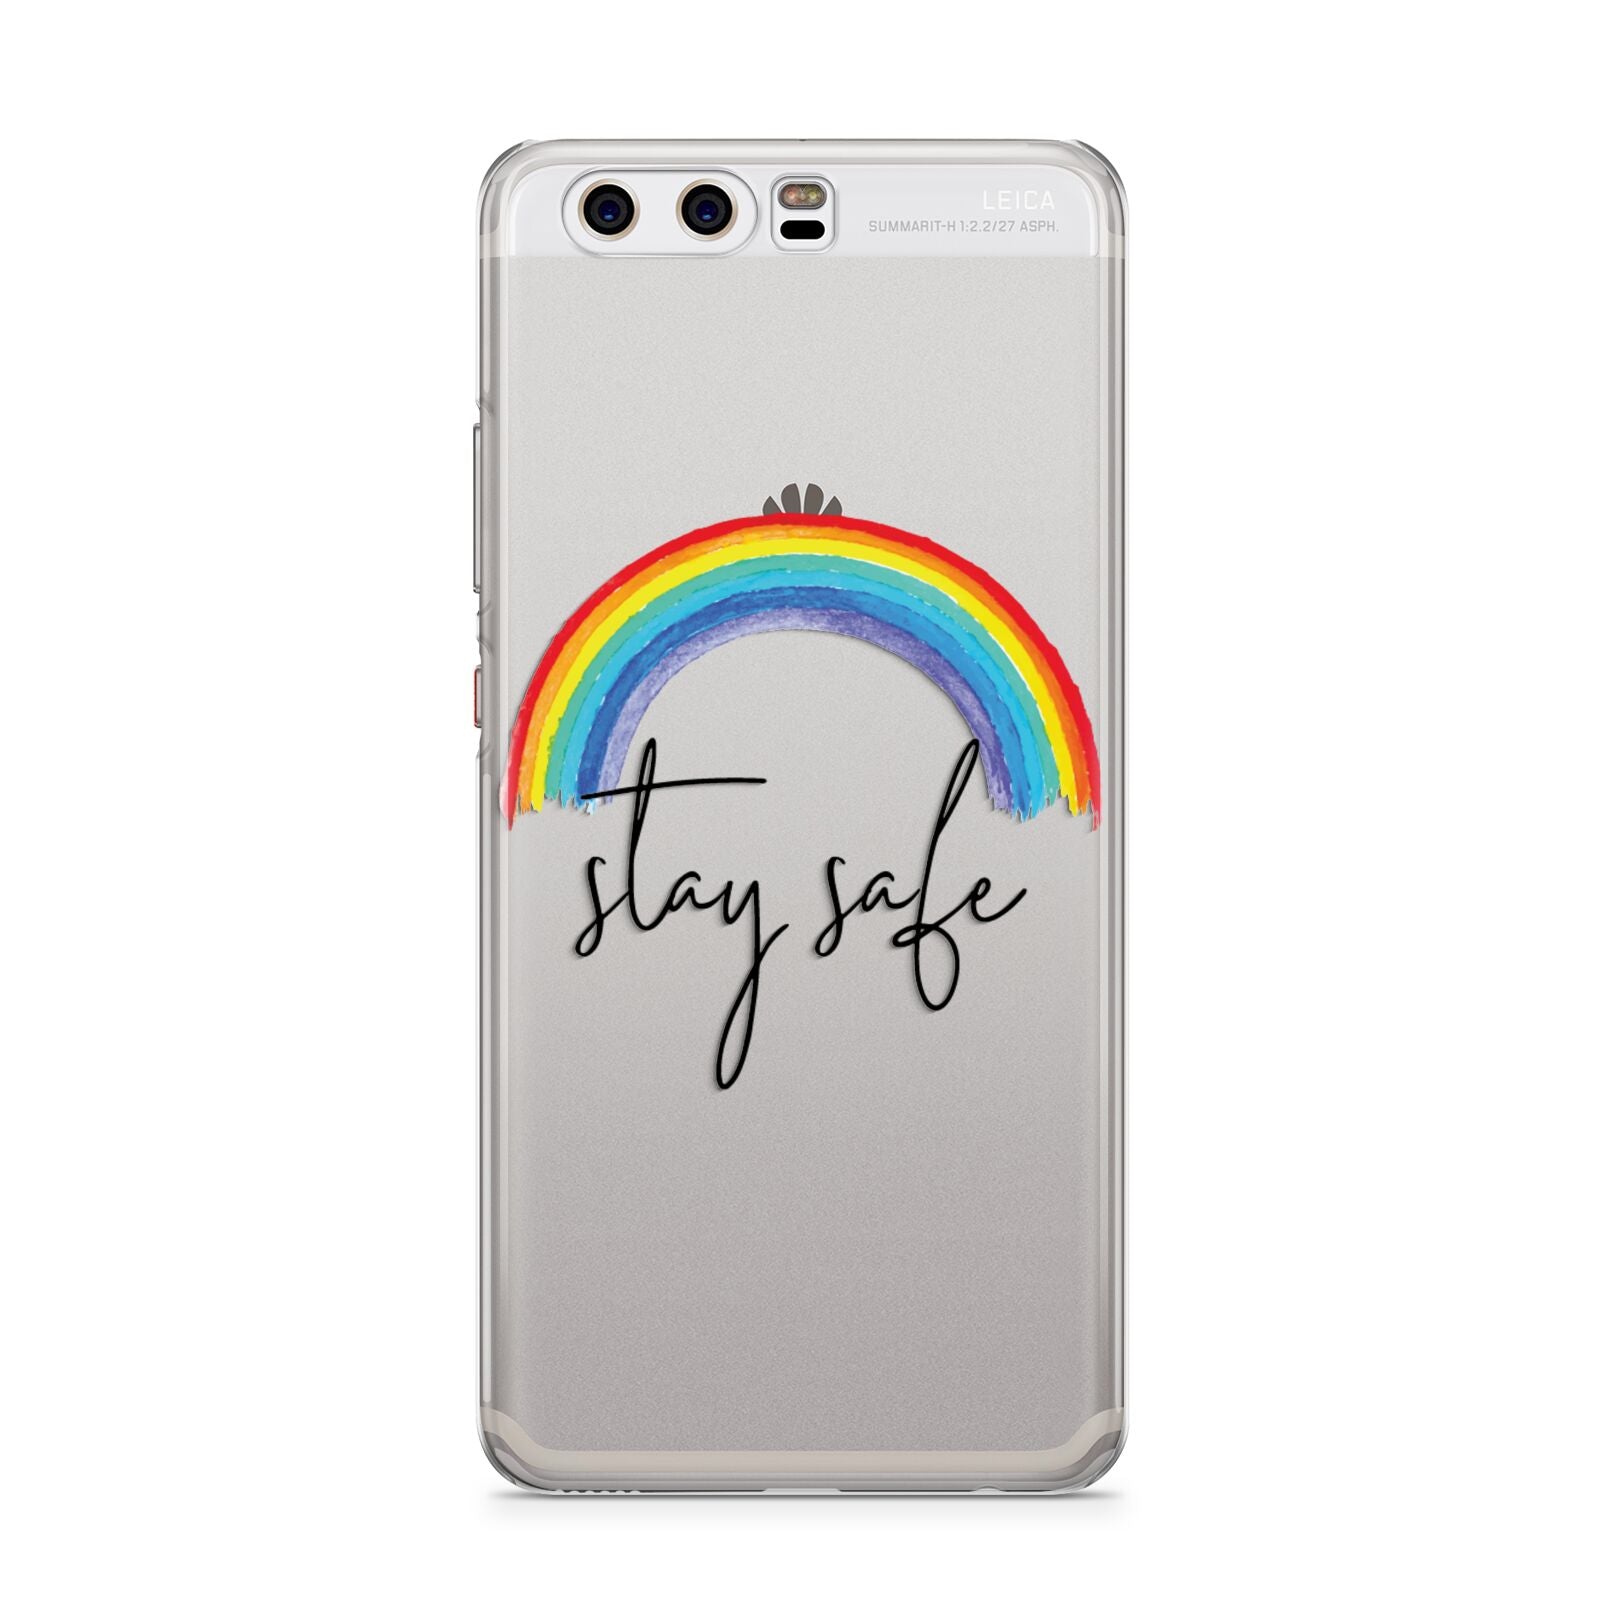 Stay Safe Rainbow Huawei P10 Phone Case